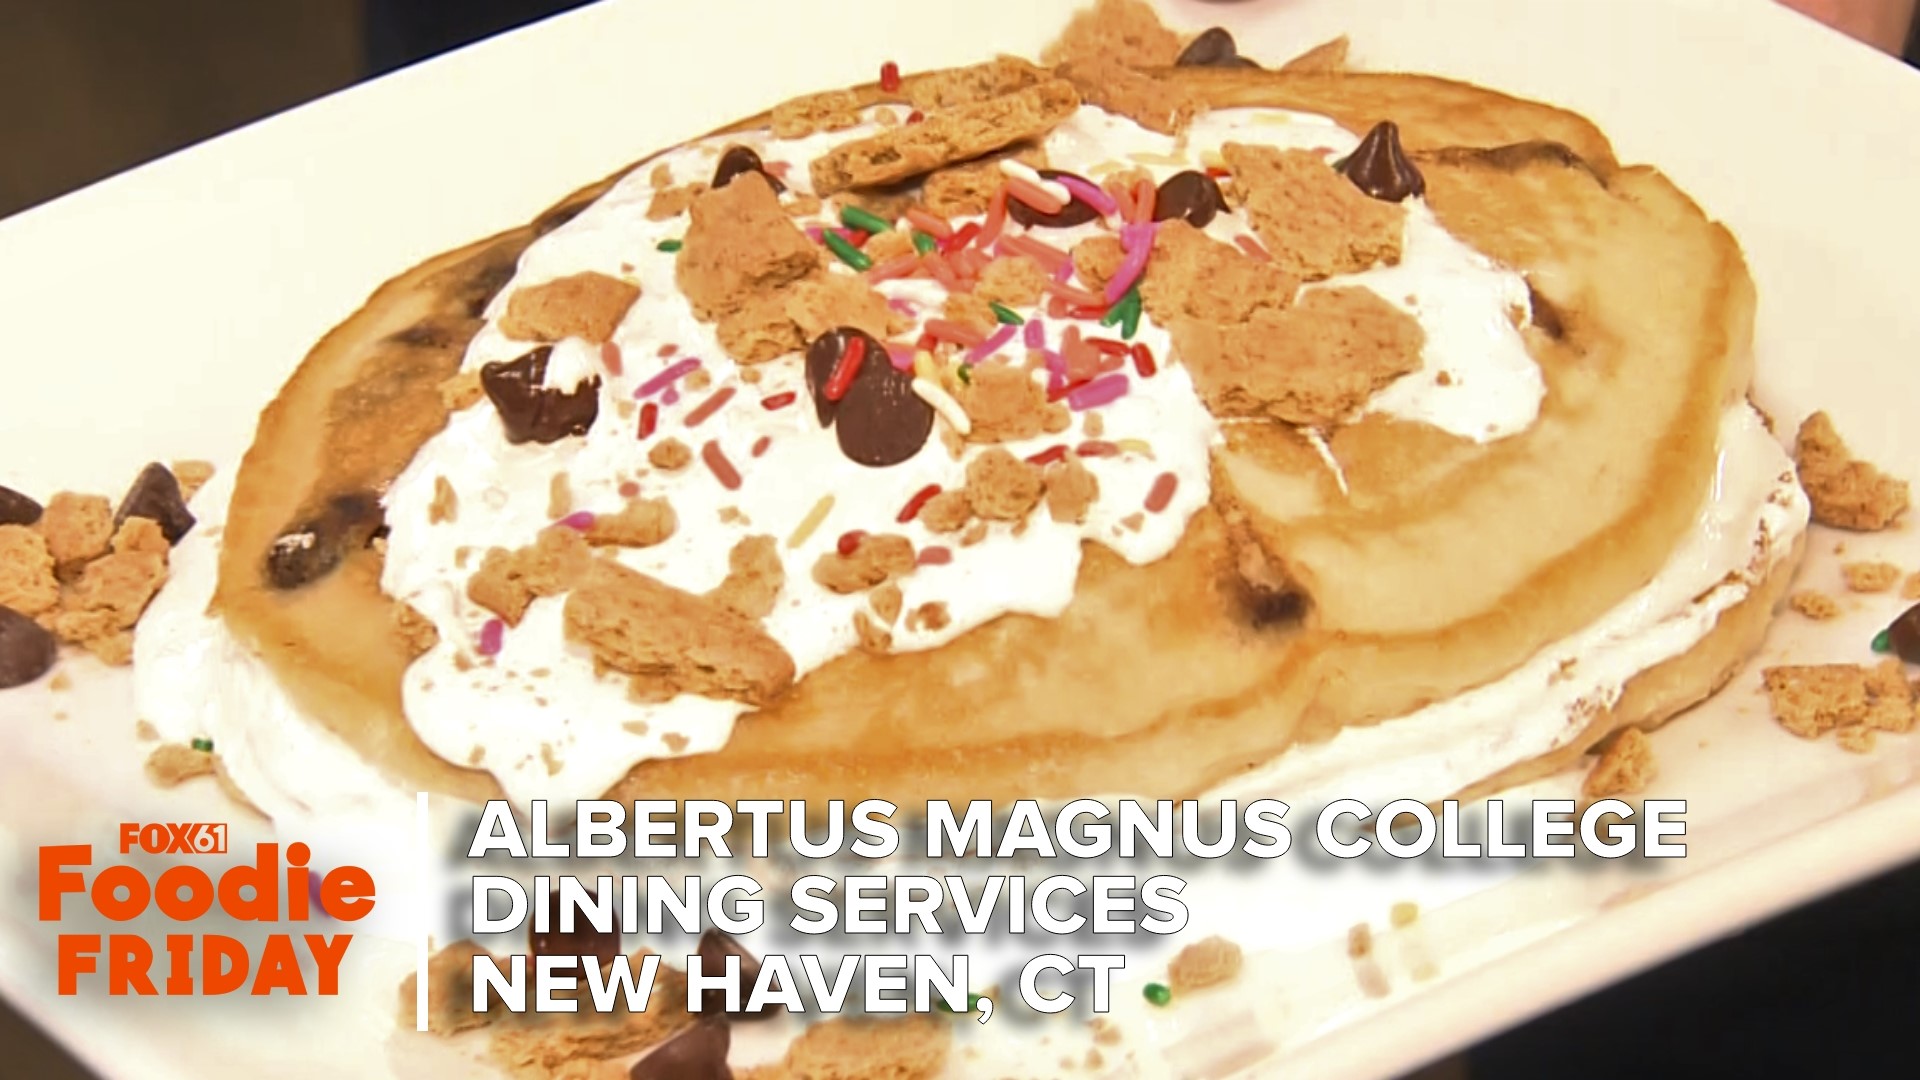 Foodie Friday and School Squad combine! FOX61's Matt Scott visited Albertus Magnus College in New Haven for move-in day.